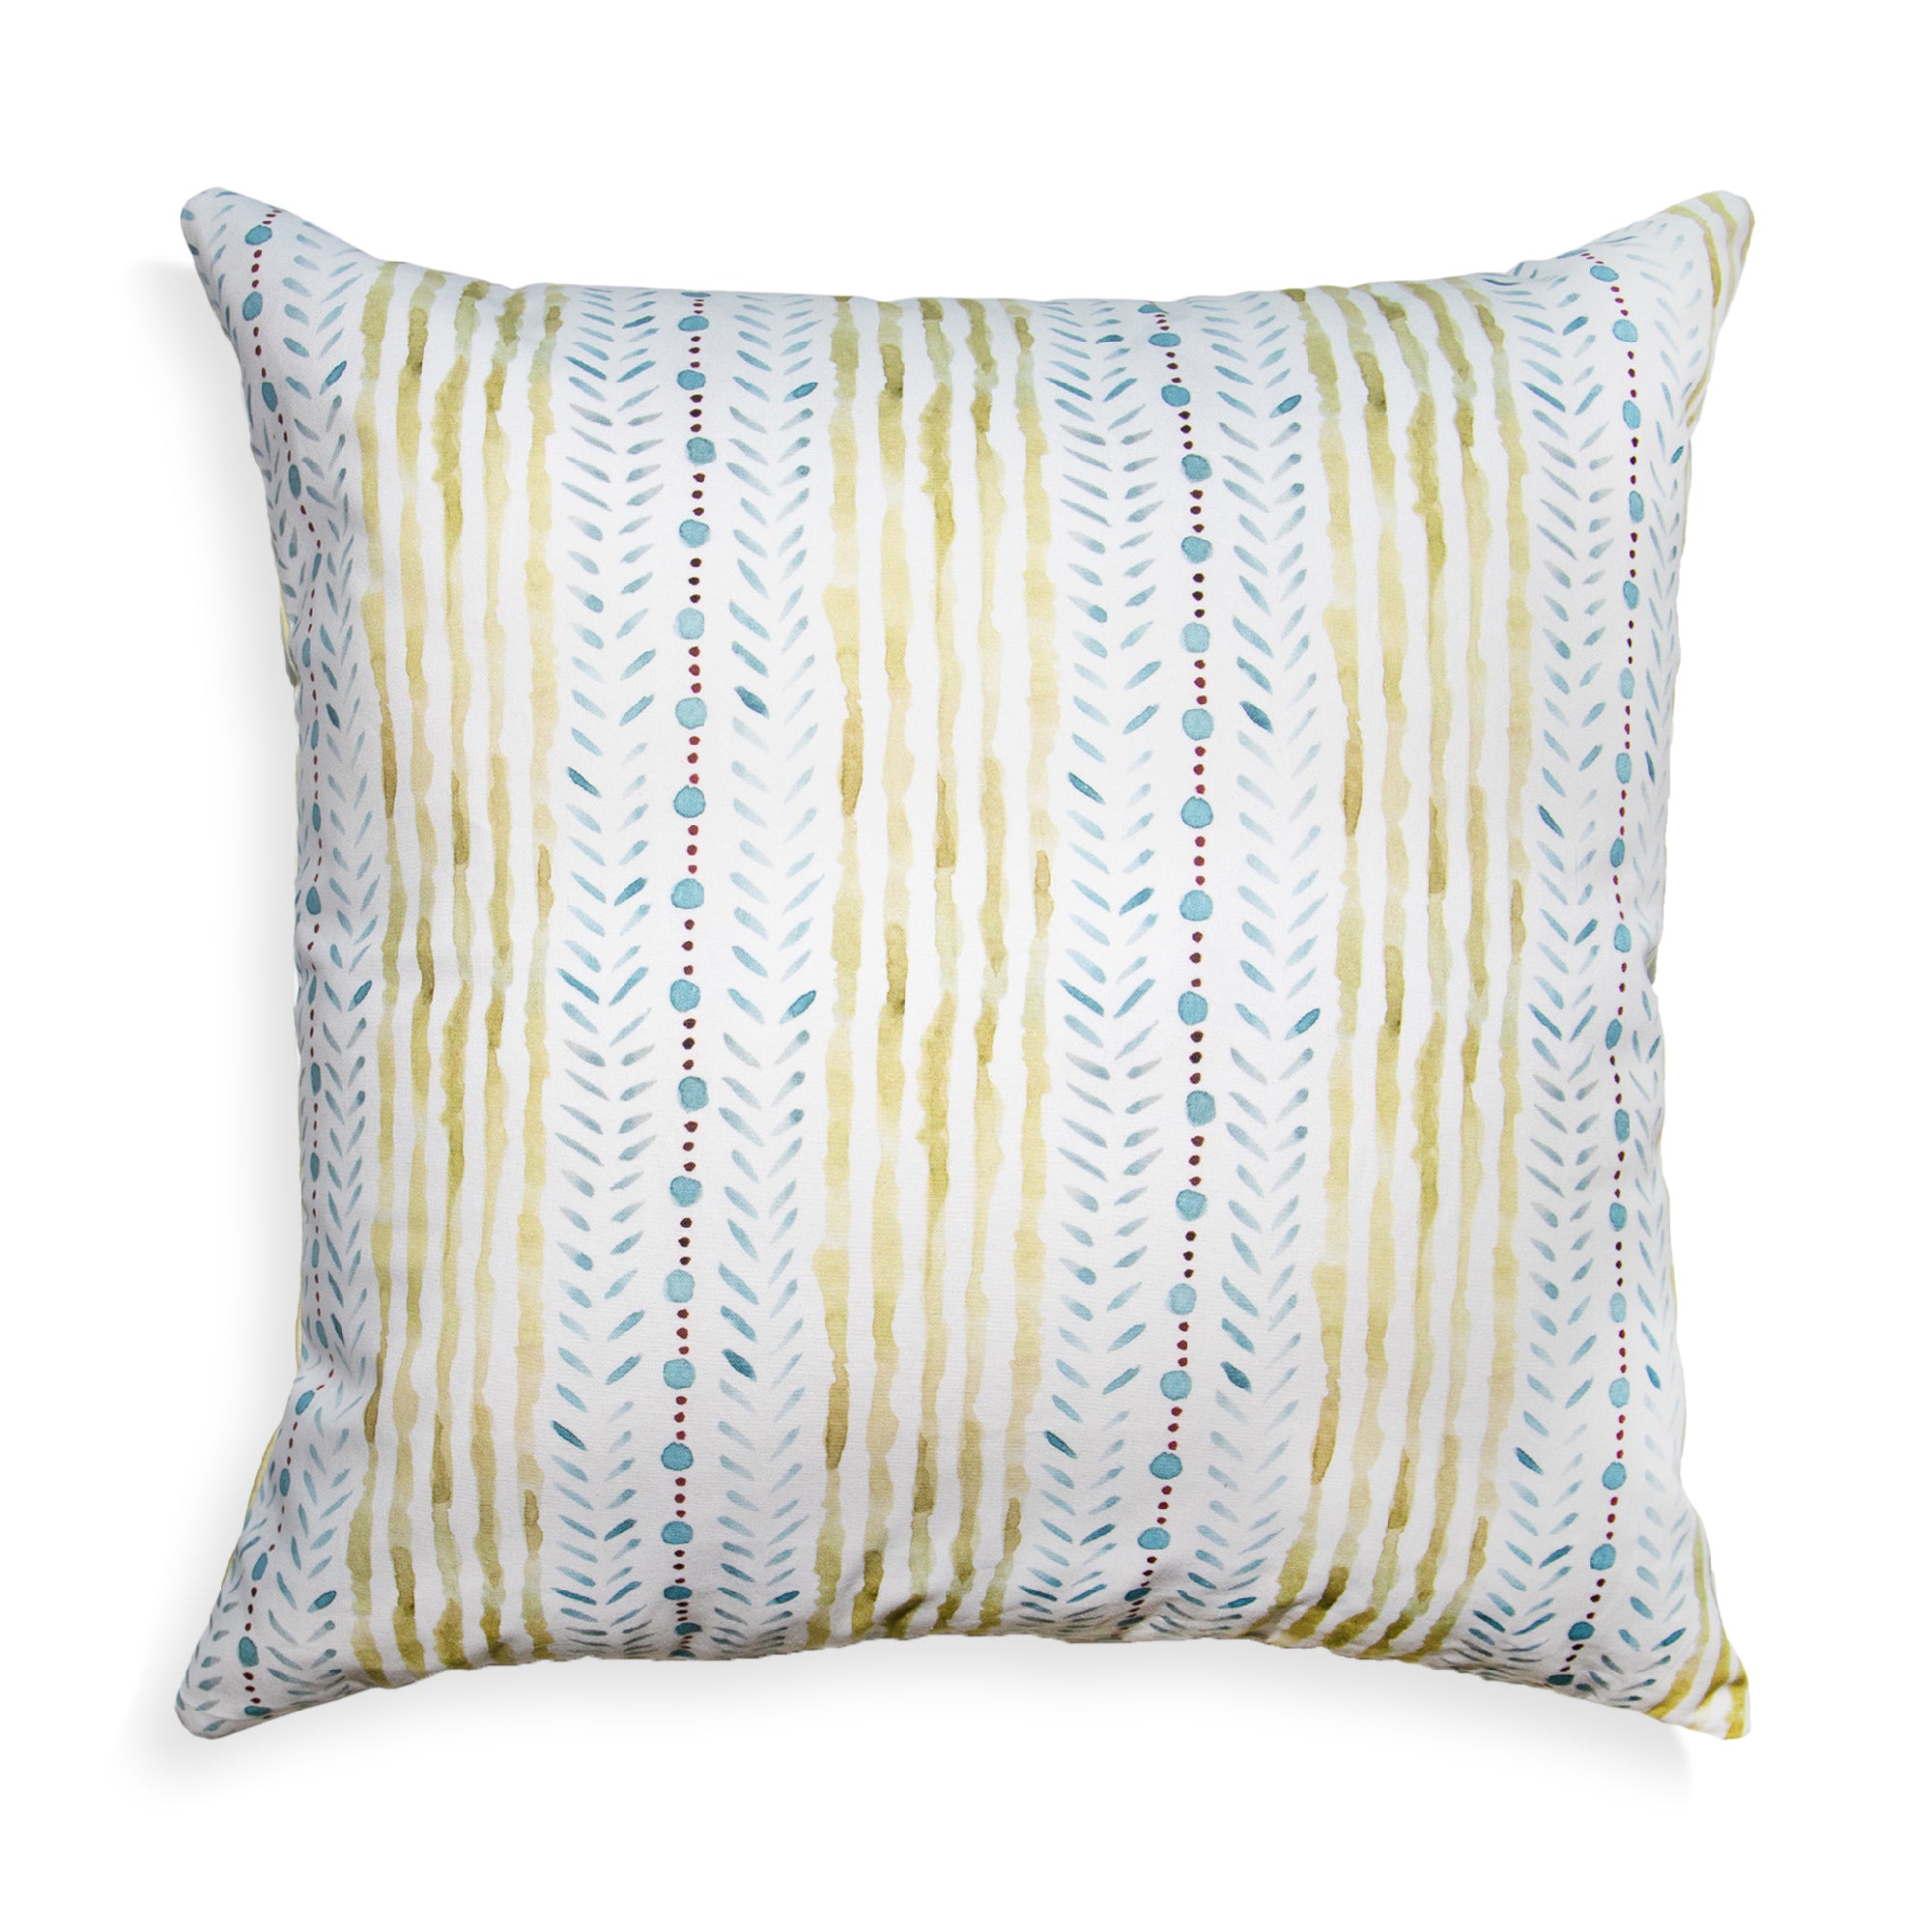 Blue & Green Striped Printed Pillow